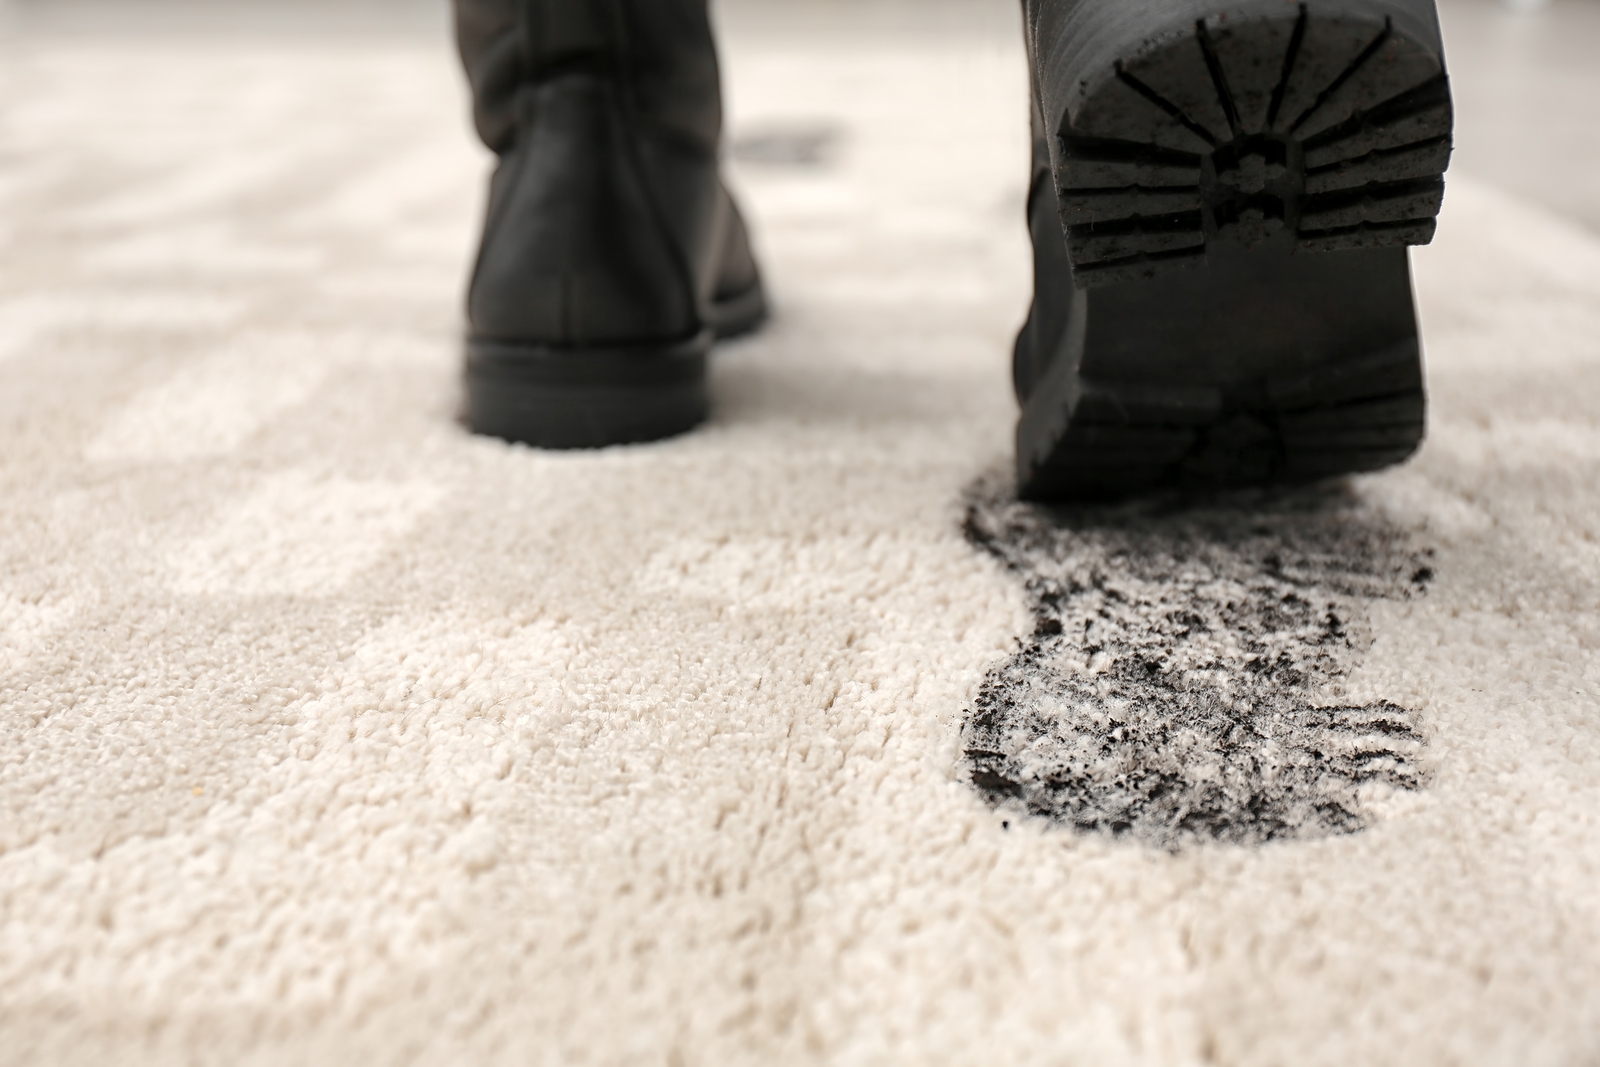 Professional Carpet Cleaning - Is it on Your Spring Cleaning Checklist?